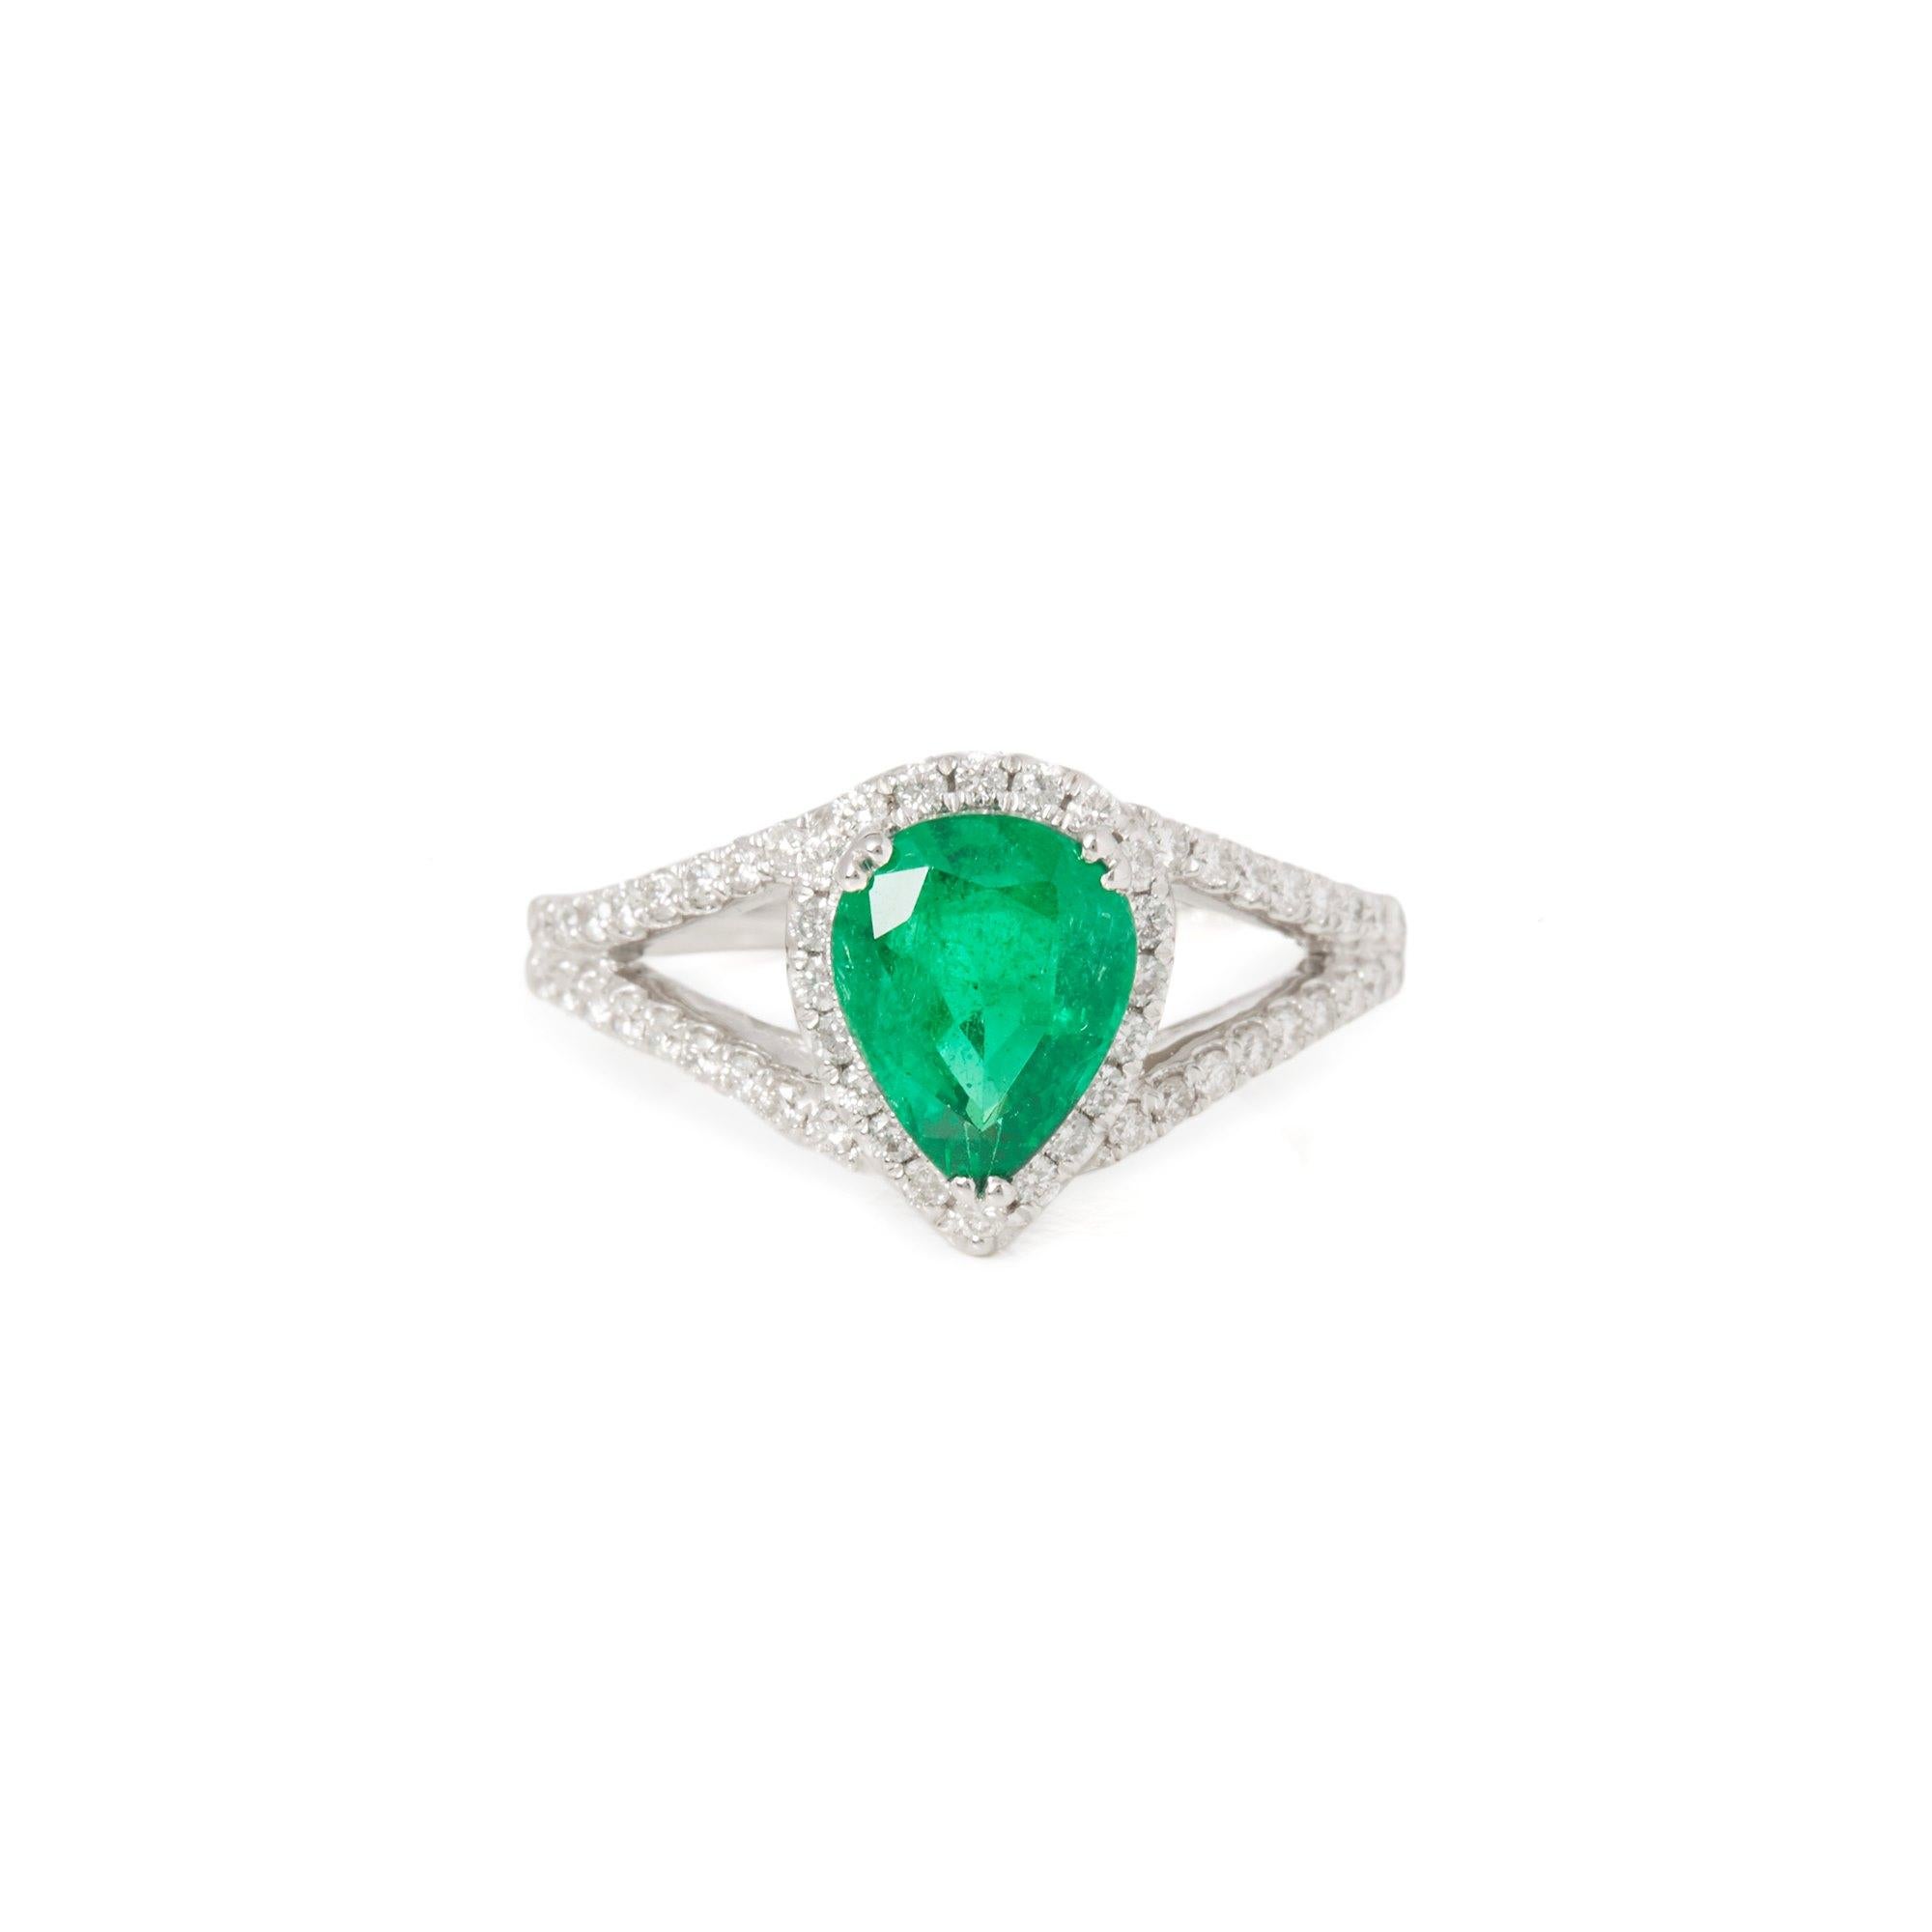 This ring designed by David Jerome is from his private collection and features one pear cut Emerald totalling 1.57cts. Set with round brilliant cut Diamonds totalling 0.71cts mounted in an 18k white gold setting. Finger size UK M, EU size 52, USA